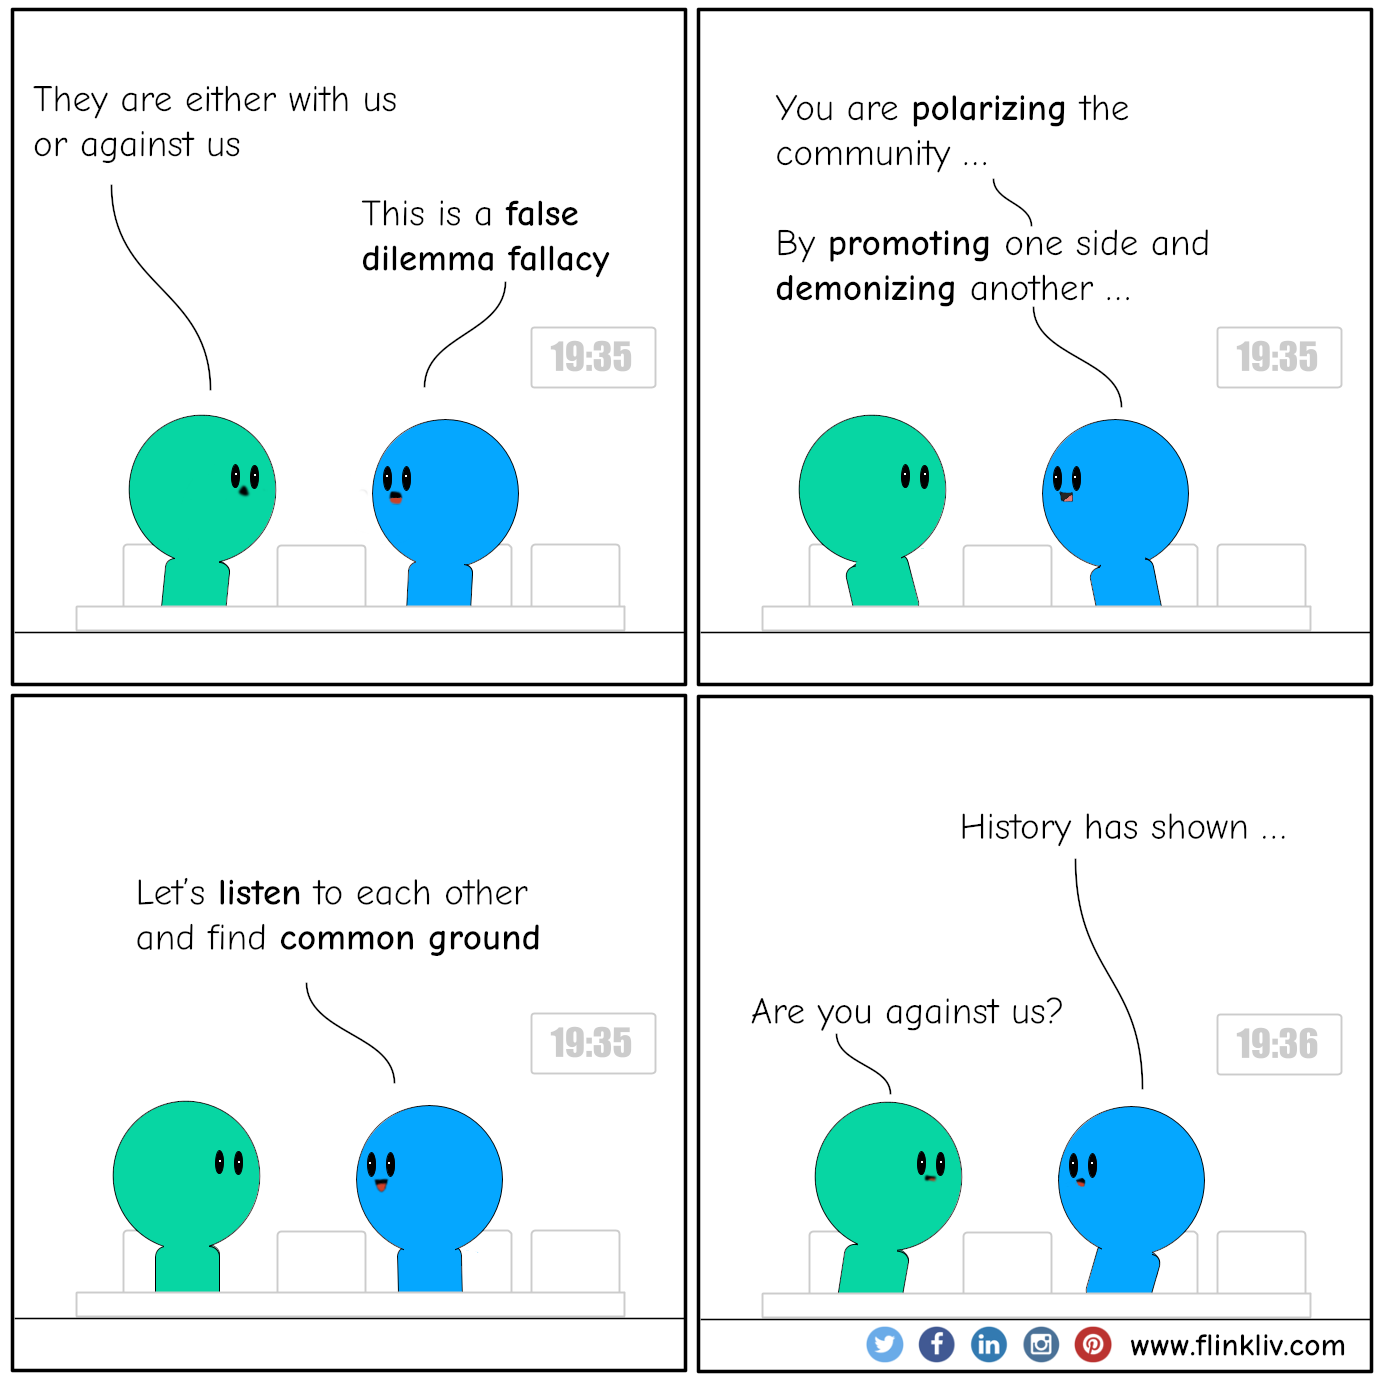 Conversation between A and B about false dilemma fallacy. A: They are either with us or against us B:This is a false dilemma fallacy B: You are polarizing the community by promoting one side and demonizing another. B: Let's listen to each other and find common ground. B:History has shown … A:Are you against us? By flinkliv.com